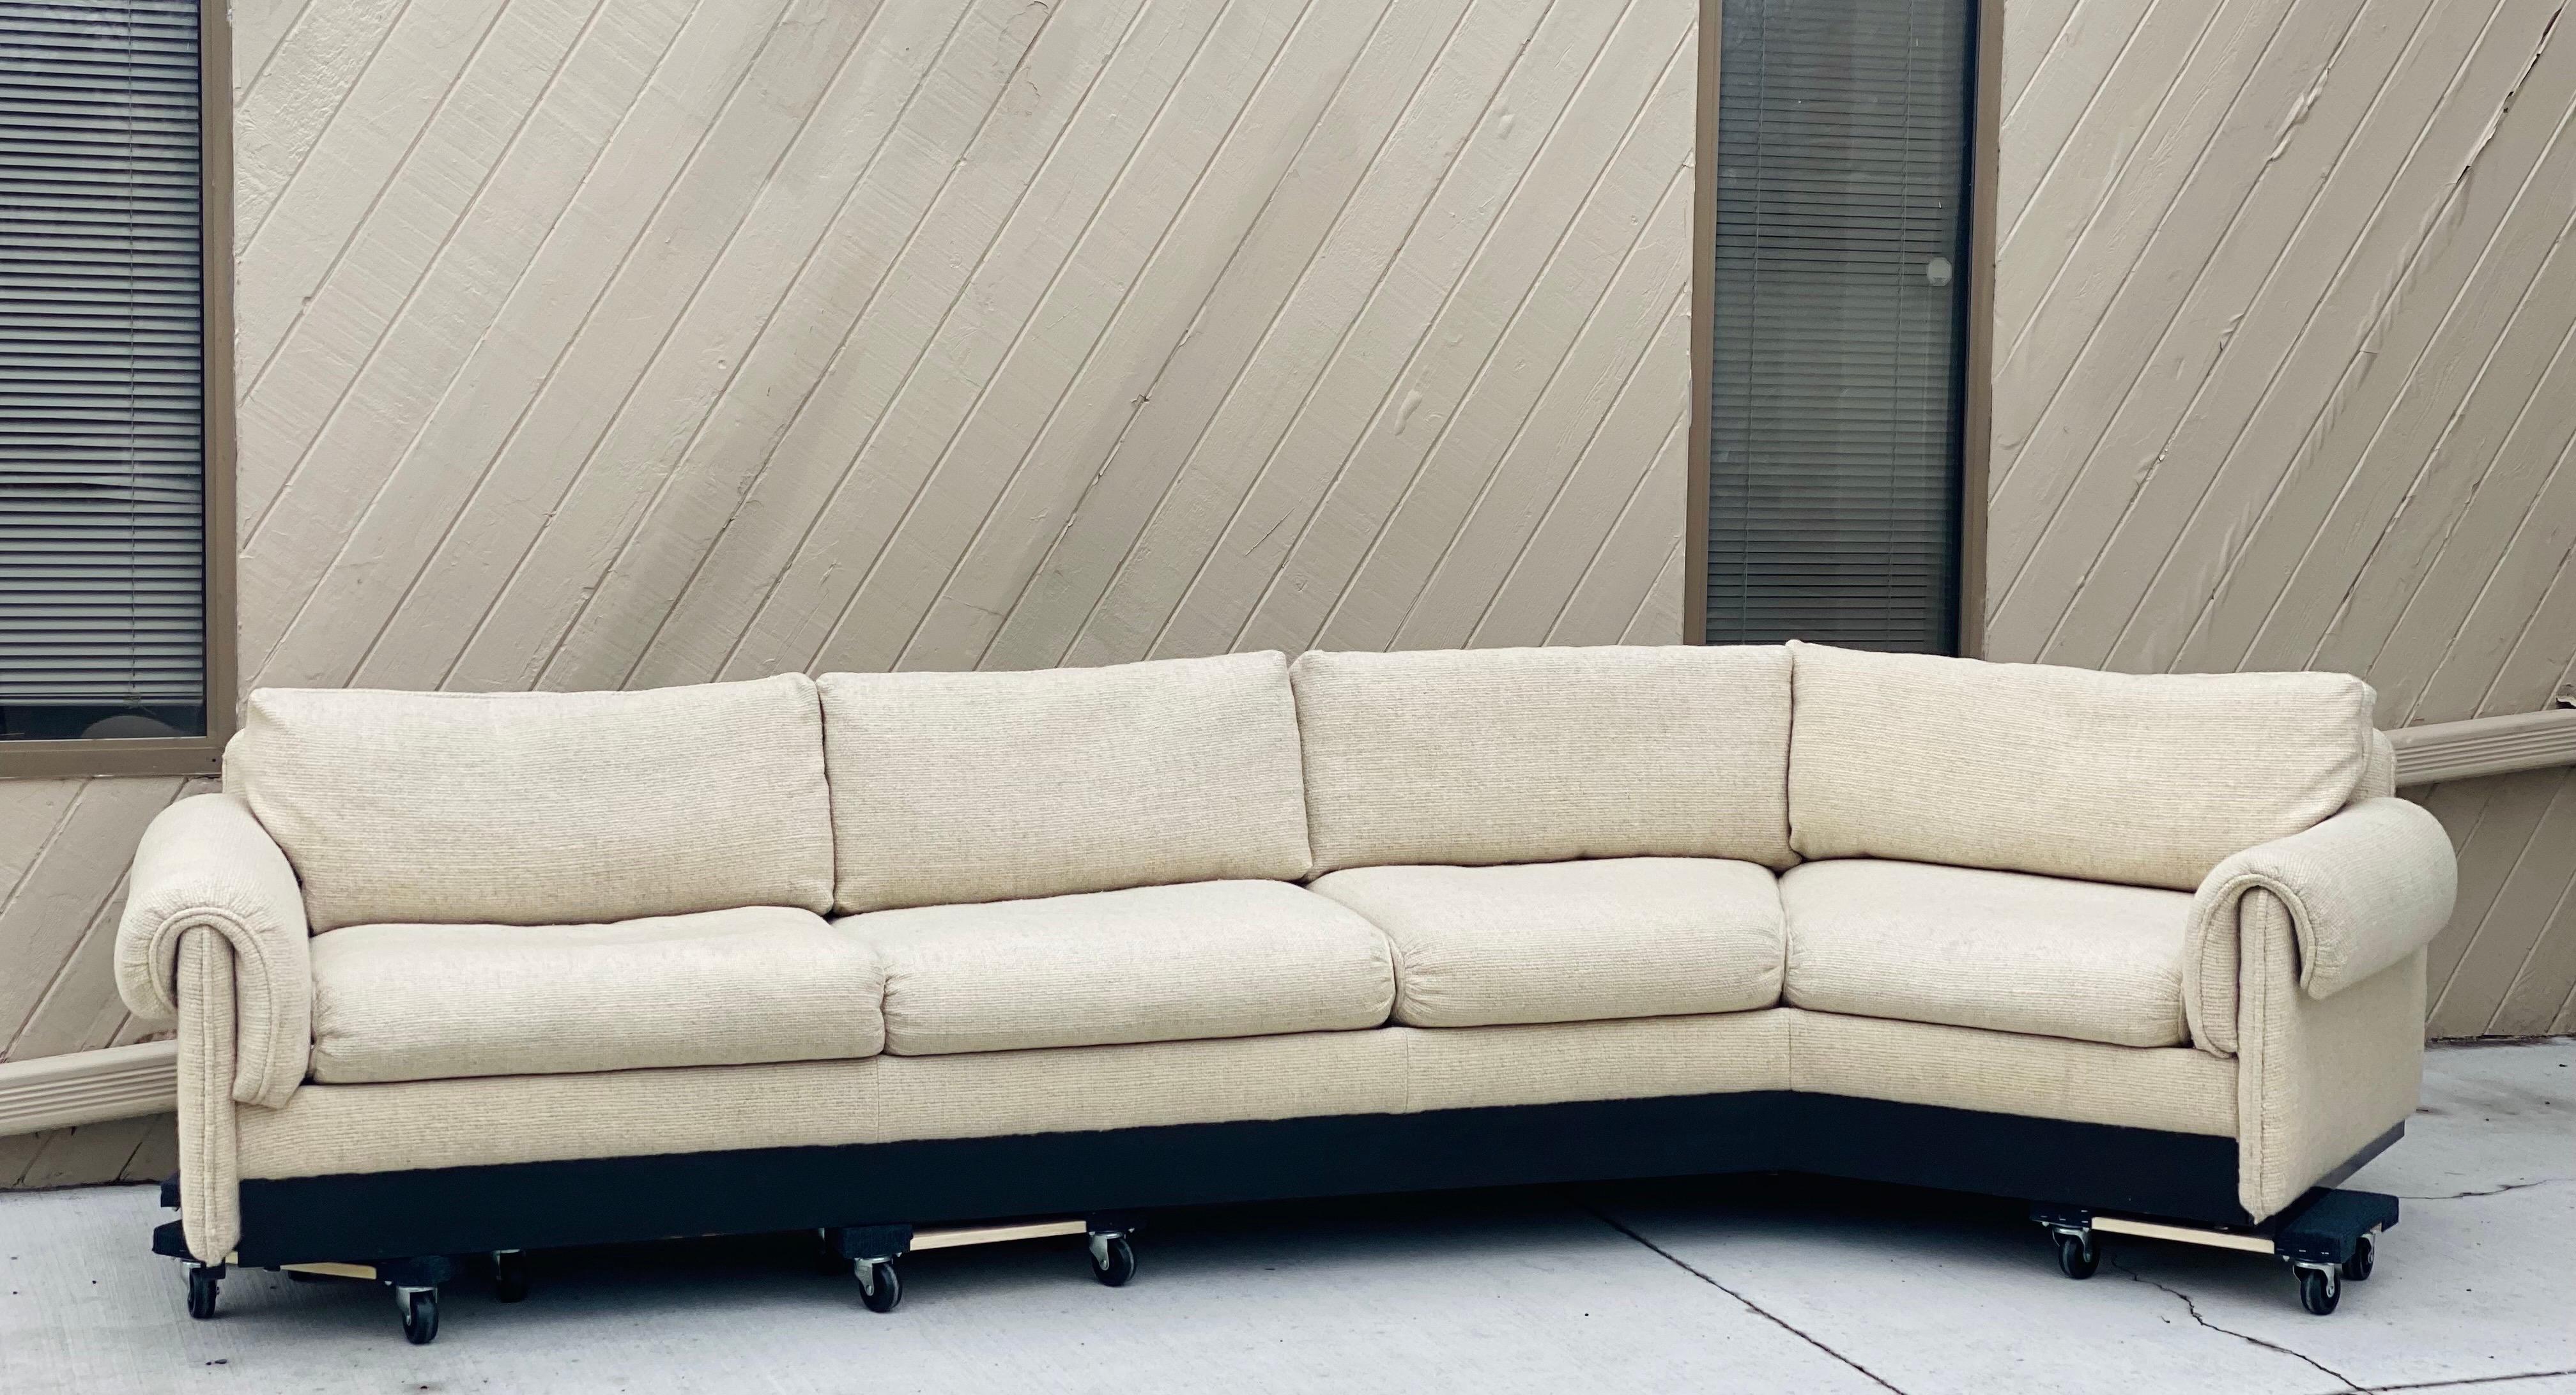 We are very pleased to offer a beautiful, modern sectional, circa the 1960s. Clean lines and an open attitude meet casual comfort on this one-piece sectional. Comprising a long seating area with a right facing angle, this piece provides a casually